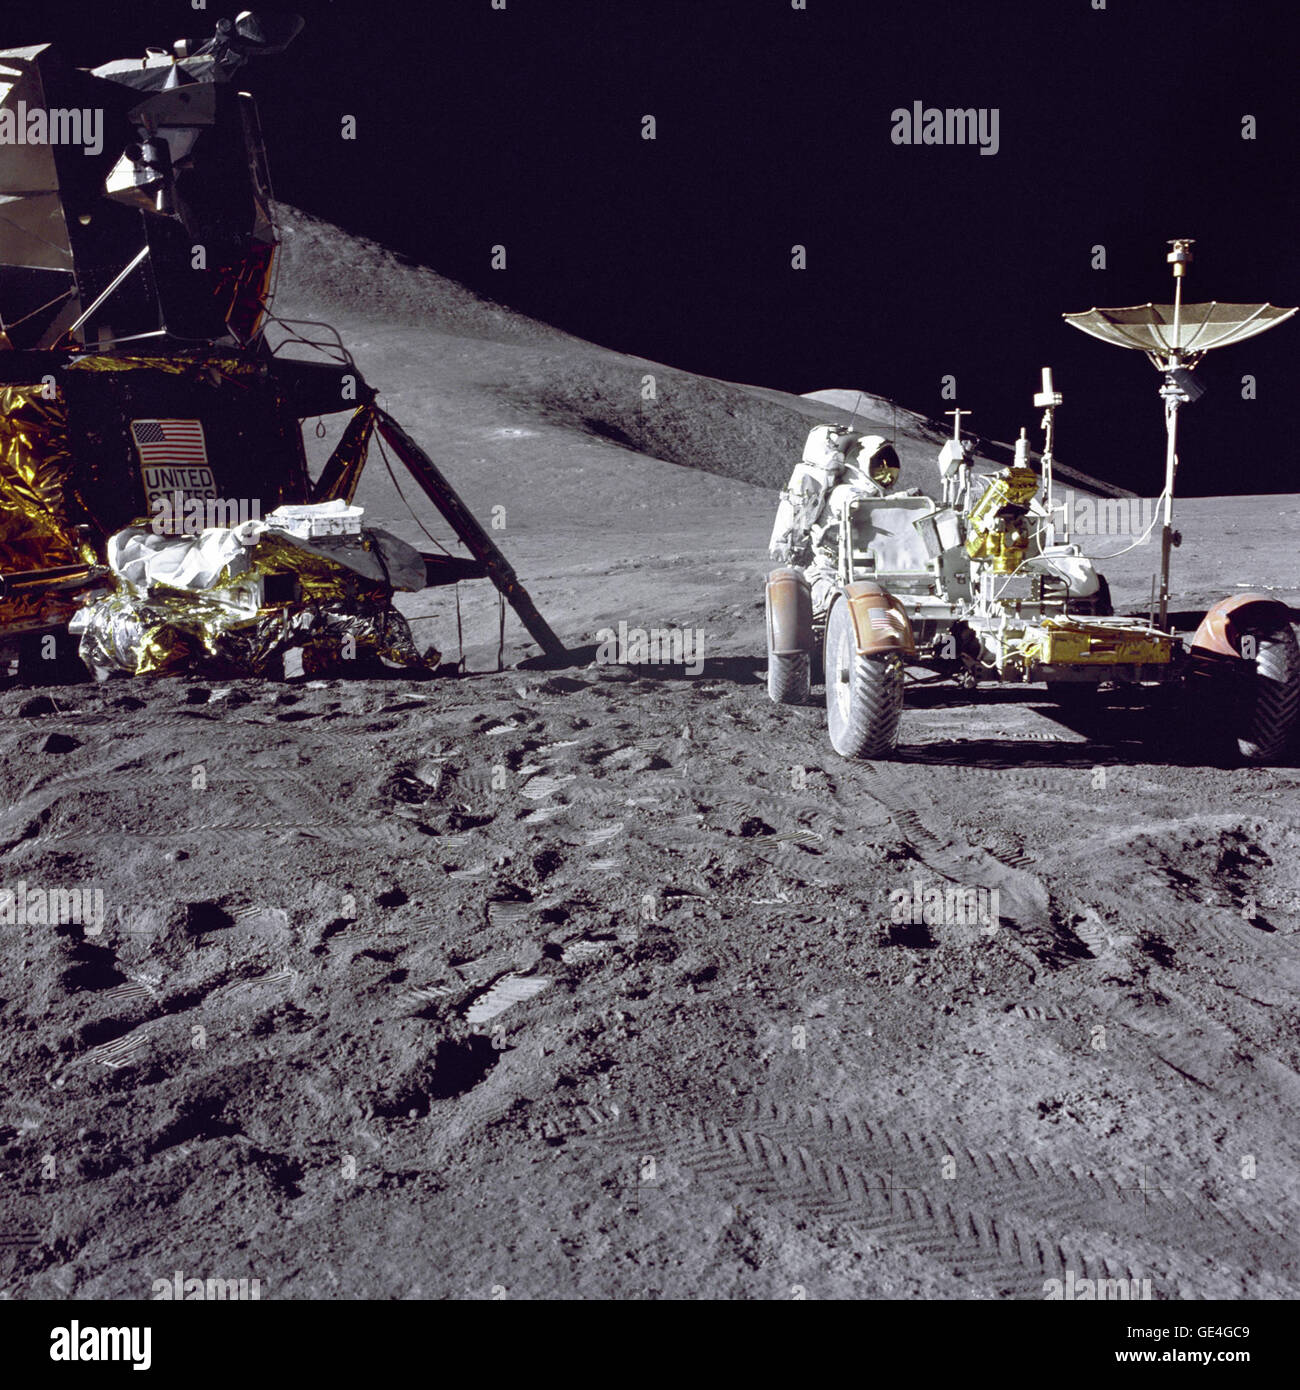 Apollo 15 Lunar Module pilot James B. Irwin loads-up the &quot;Rover&quot;, Lunar Roving Vehicle (LRV) with tools and equipment in preparation for the first lunar extravehicular activity (EVA-1) at the Hadley-Apennine landing site. A portion of the Lunar Module (LM) &quot;Falcon&quot; is on the left. The undeployed Laser Ranging Retro-Reflector (LR-3) lies atop the LM's Modular Equipment Stowage Assembly (MESA). This view is looking slightly West of South. Hadley Delta and the Apennine Front are in the background to the left. St. George crater is approximately 5 kilometers (about 3 statute mil Stock Photo